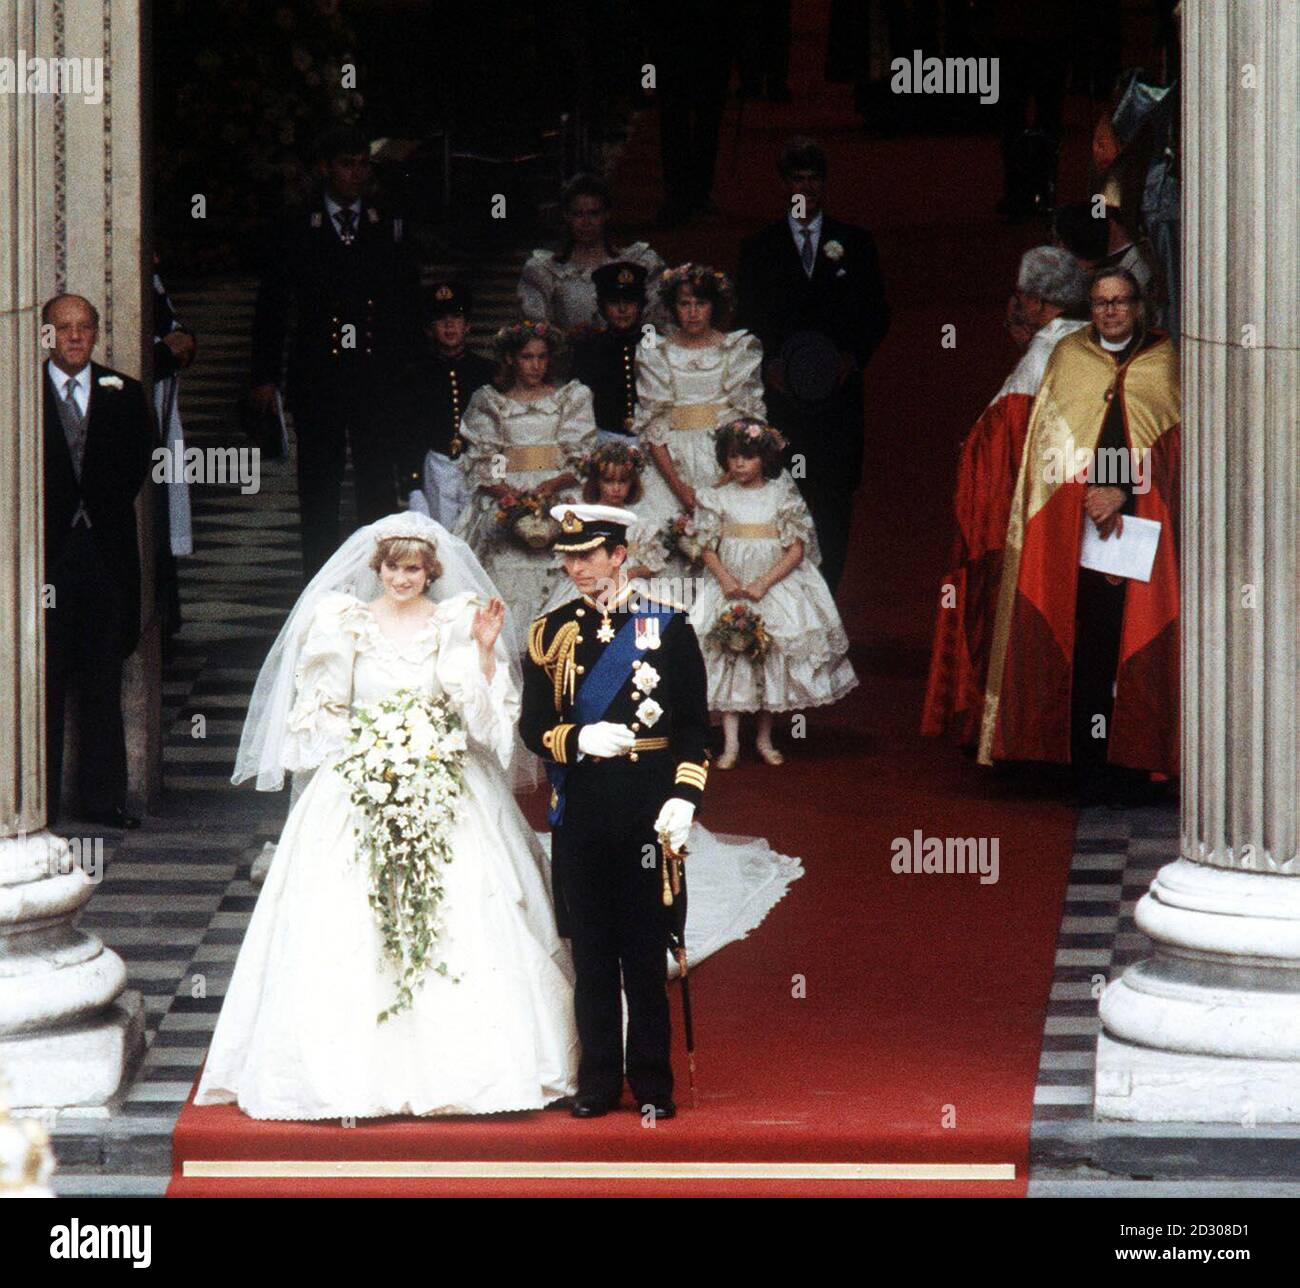 The Princess of Wales, formerly Lady Diana Spencer, waves to the crowds as she leaves St. Paul's Cathedral in London with her husband, the Prince of Wales after their wedding ceremony. The Princess' dress was designed by Elizabeth and David Emanuel. * has a 25ft long detachable train. Her veil of ivory silk tulle, spangled with thousands of tiny hand-embroidered mother-of-pearl sequins, is held in place by the Spencer Family diamond tiara. Stock Photo